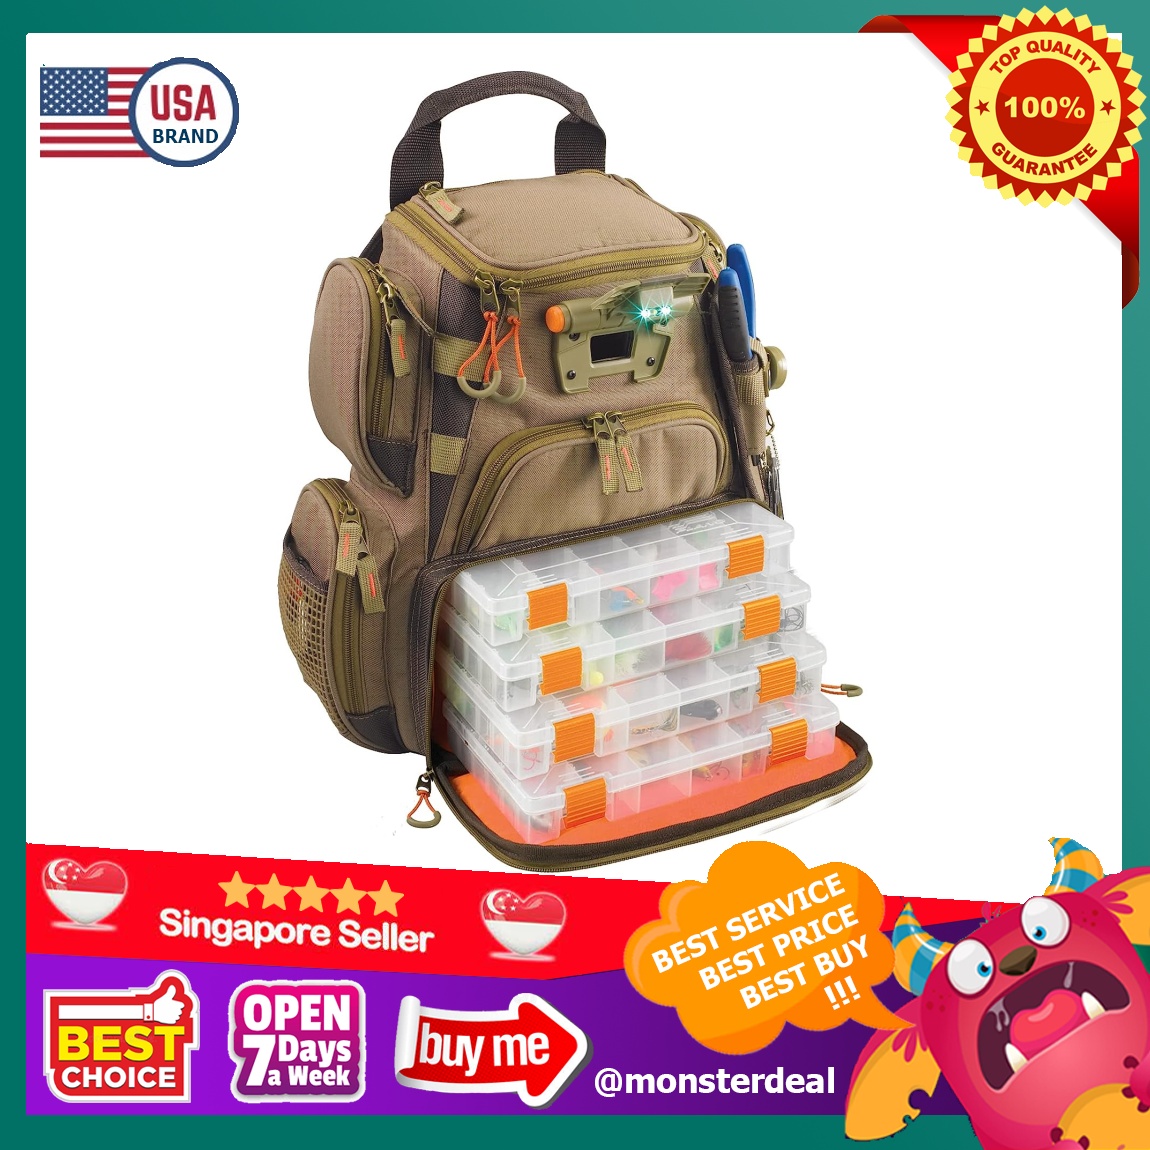 Wild River Recon Lighted Compact Fishing Tackle Storage Backpack